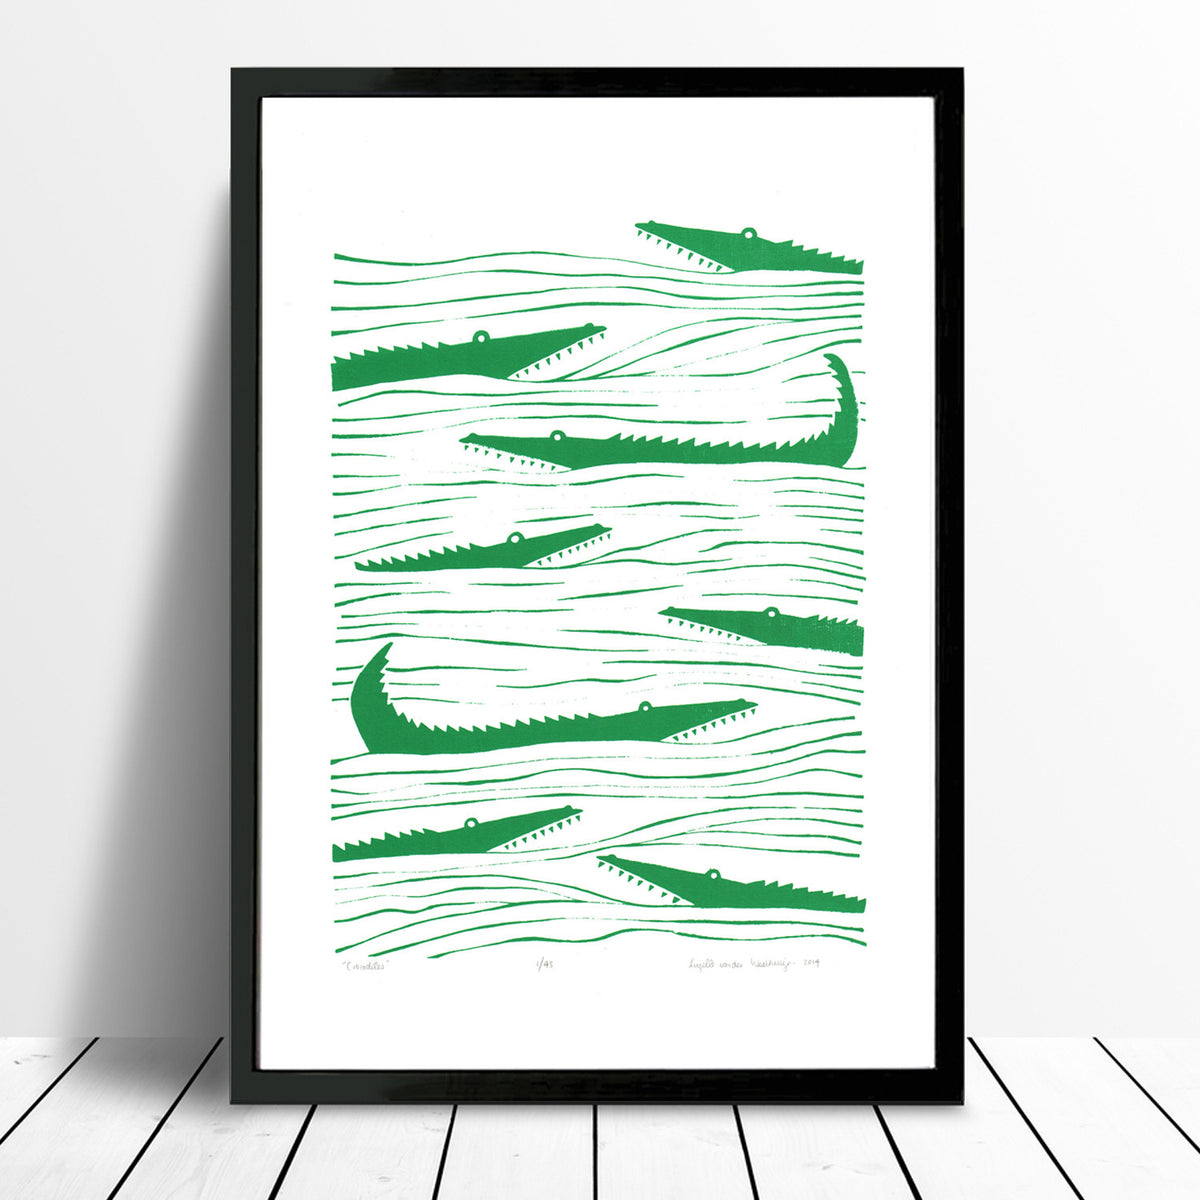 Graphic emerald green patterned art print of crocodiles lurking in the waters. Inspired by the simple shapes of animals found in African wood carvings.